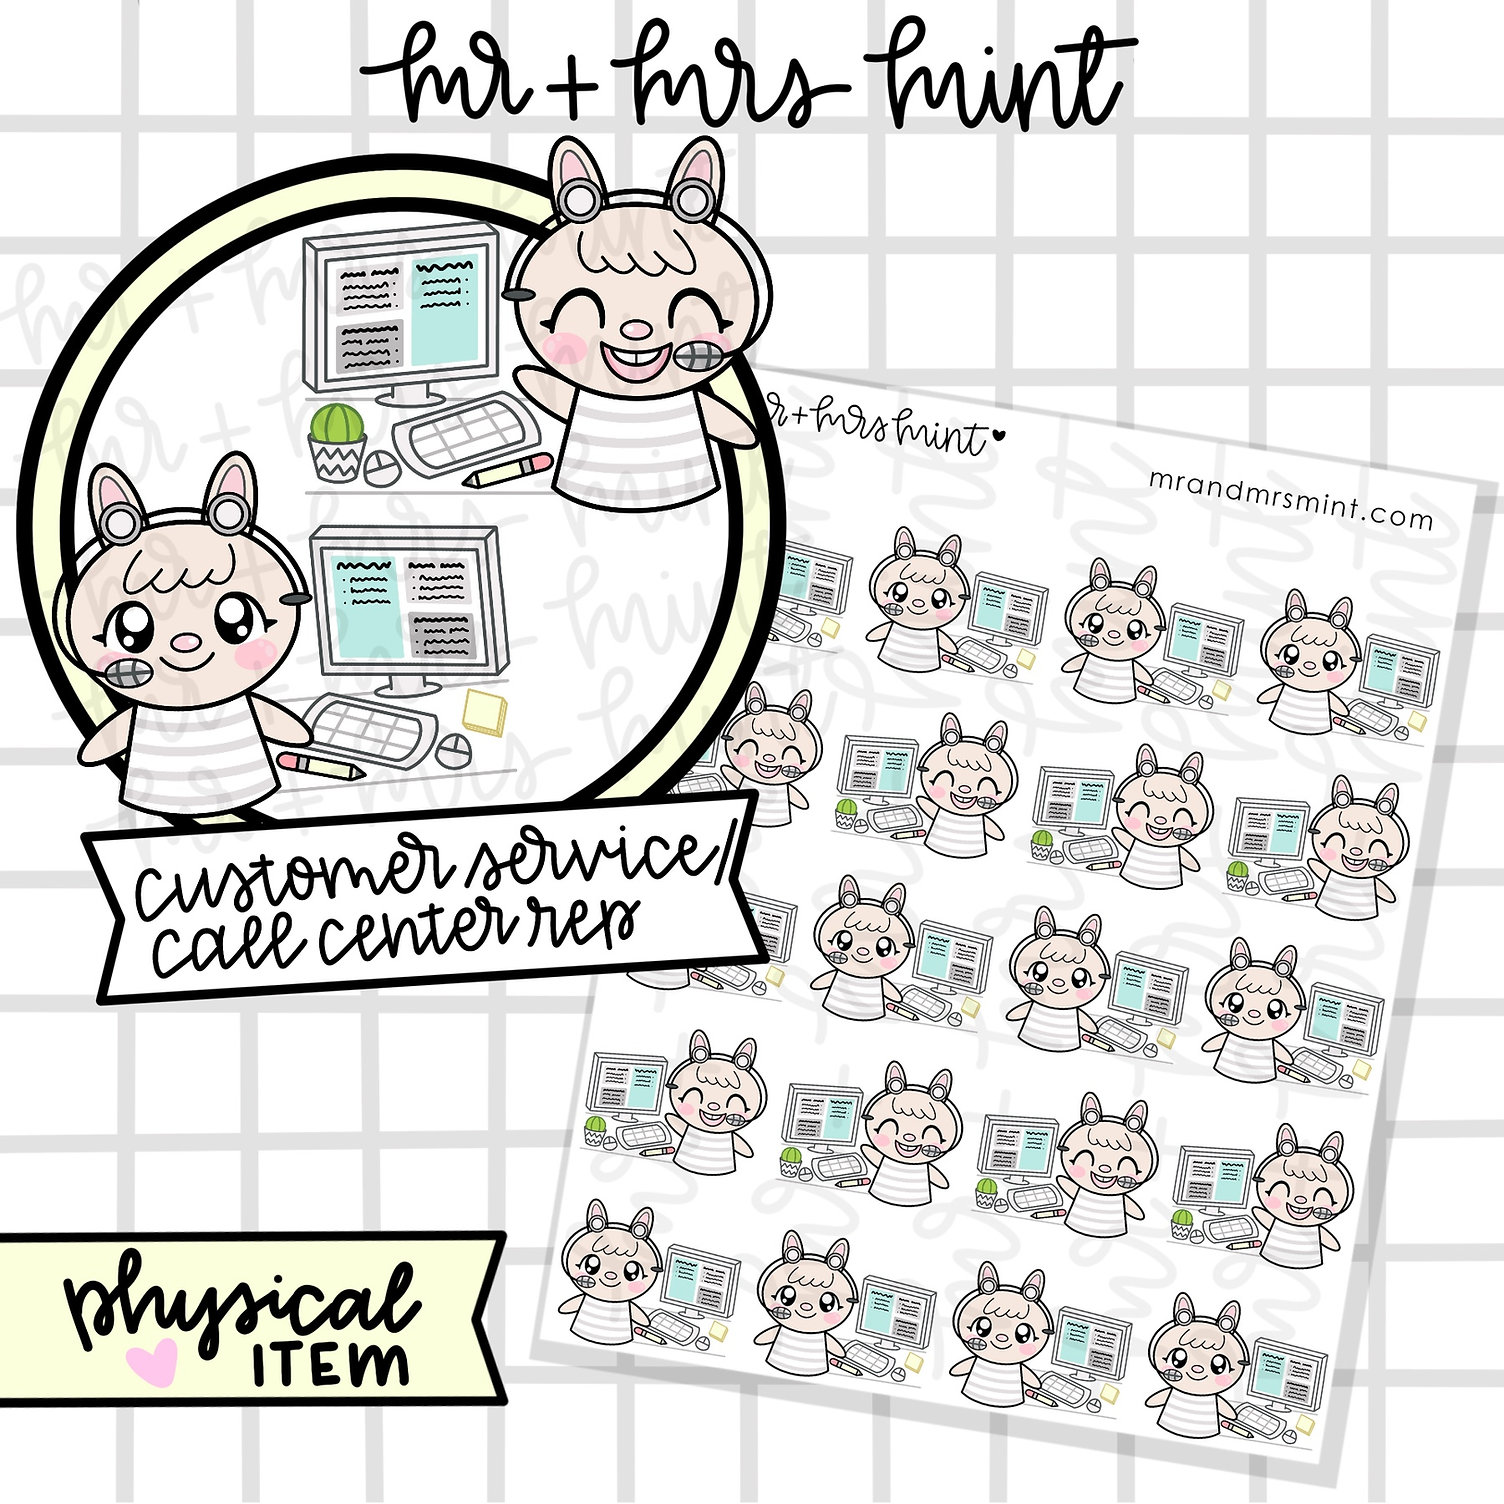 Free Printable Cute Cats Weekly Planner And Cats Planner Stickers